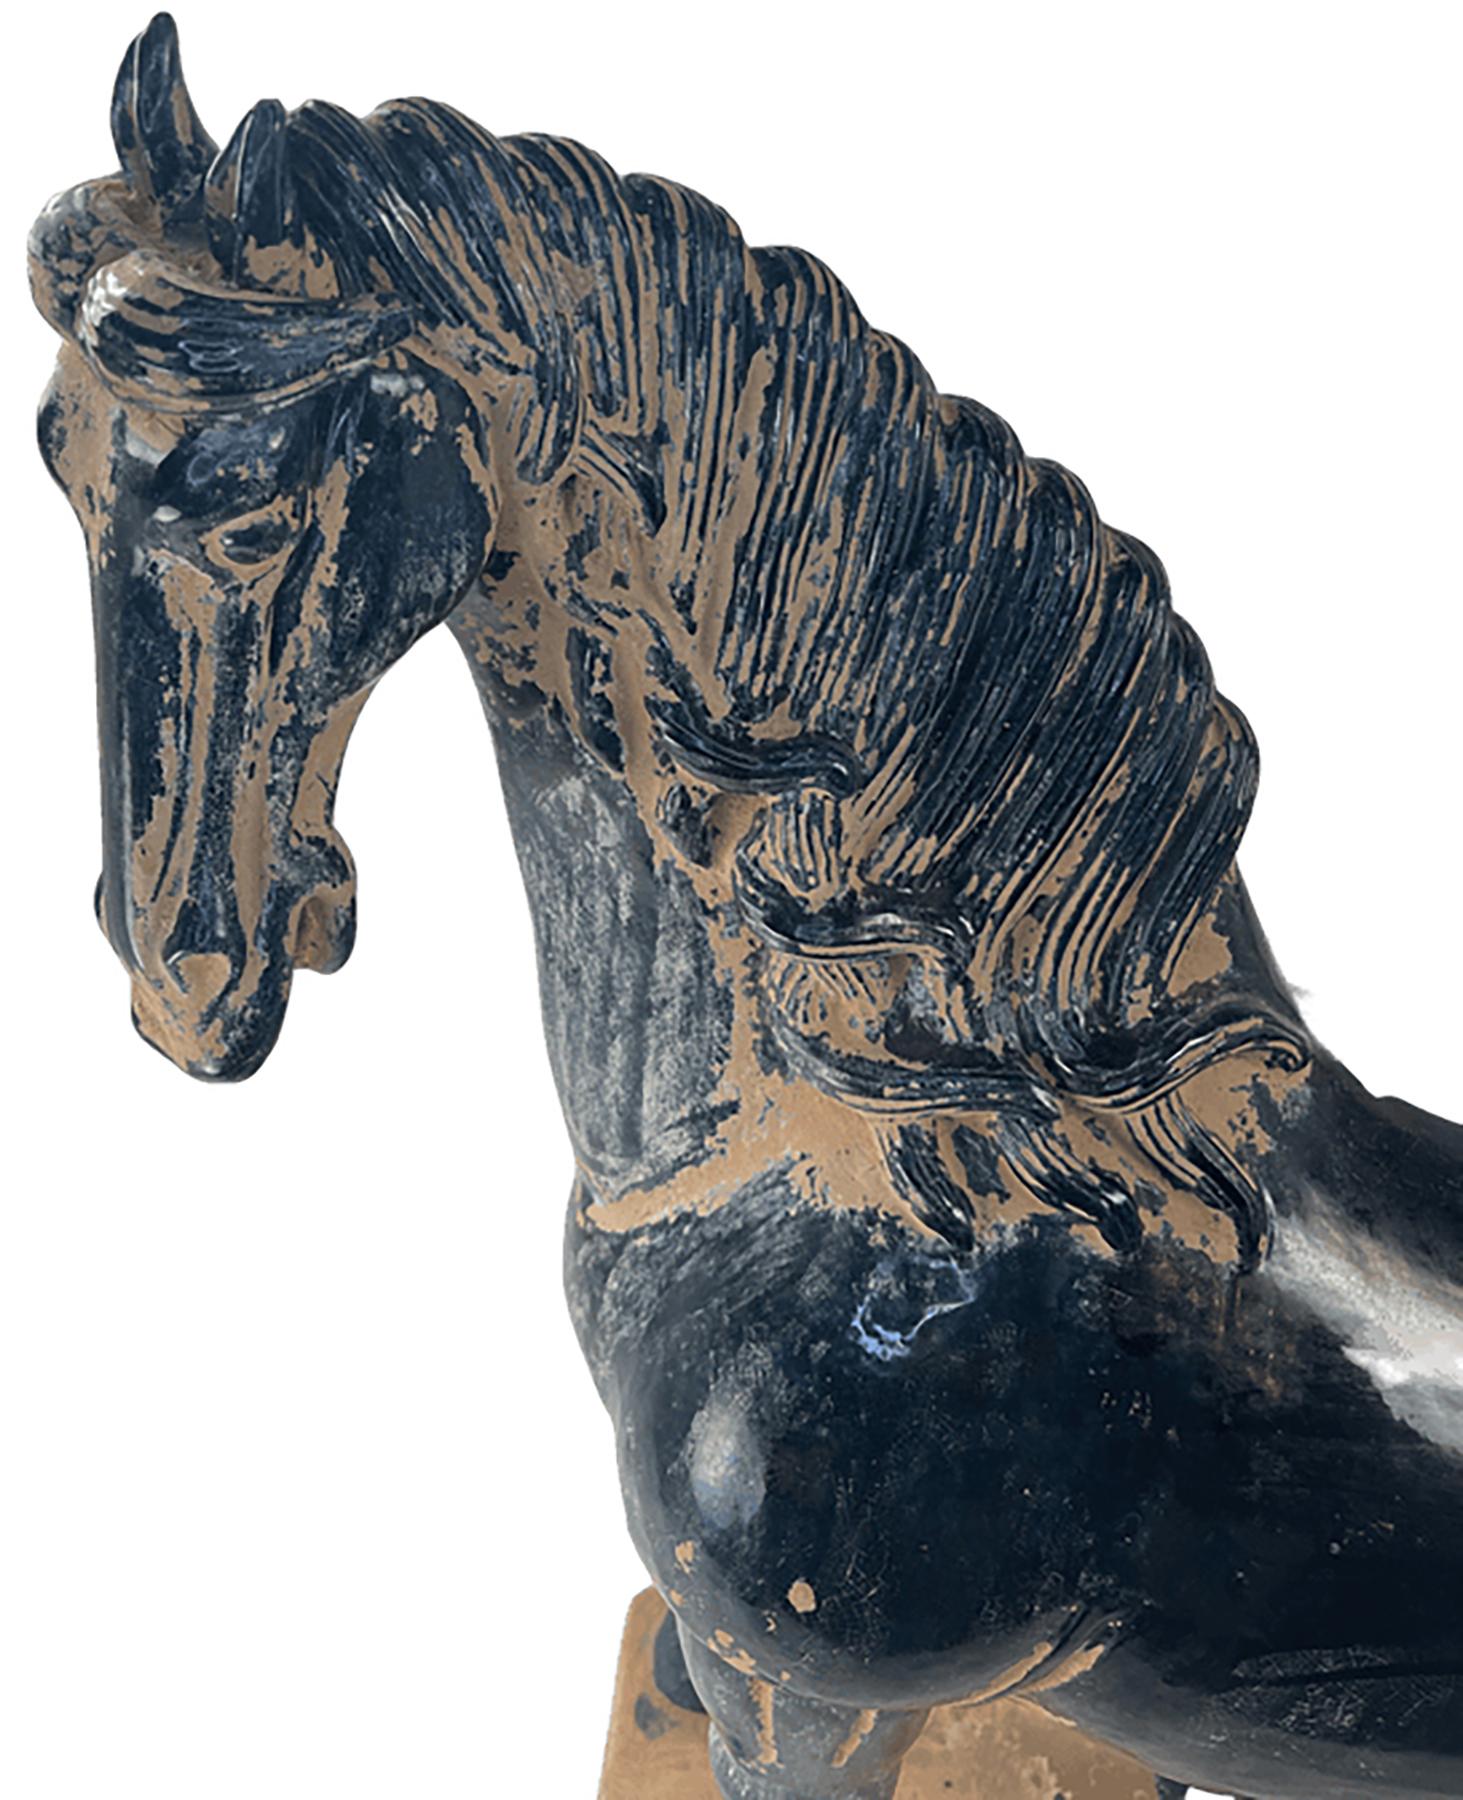 A handcrafted terracotta horse in the style of the Tang Dynasty sculptural tradition. 

Much of the body of the piece is glazed with a dark indigo blue finish. Some fading in detailed areas provides visual accent and personality to the piece. The